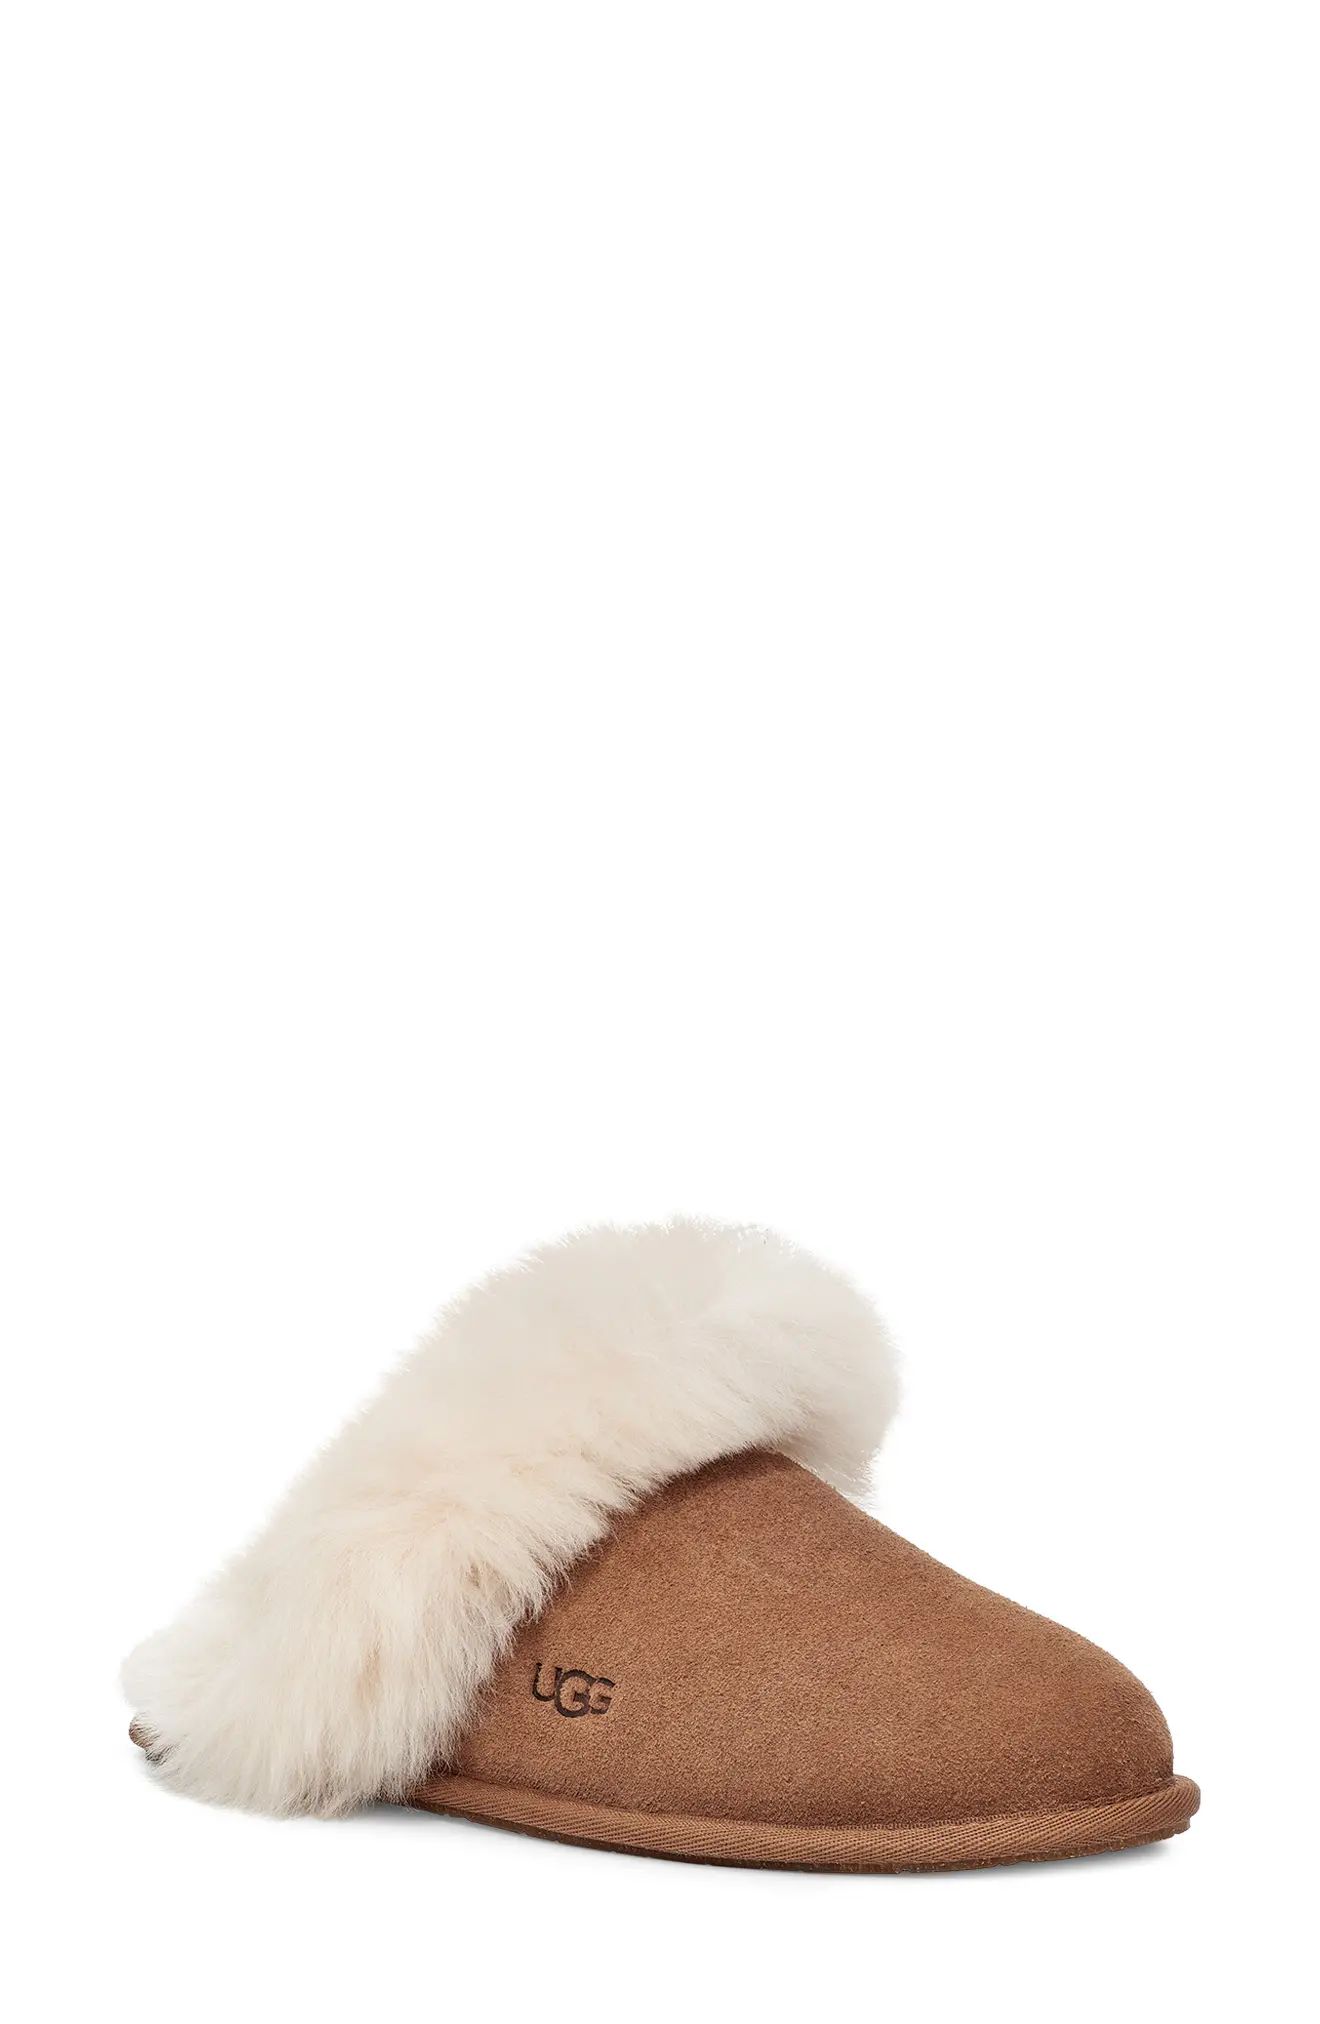 UGG(R) Scuff Sis Genuine Shearling Mule Slipper, Size 5 in Chestnut at Nordstrom | Nordstrom